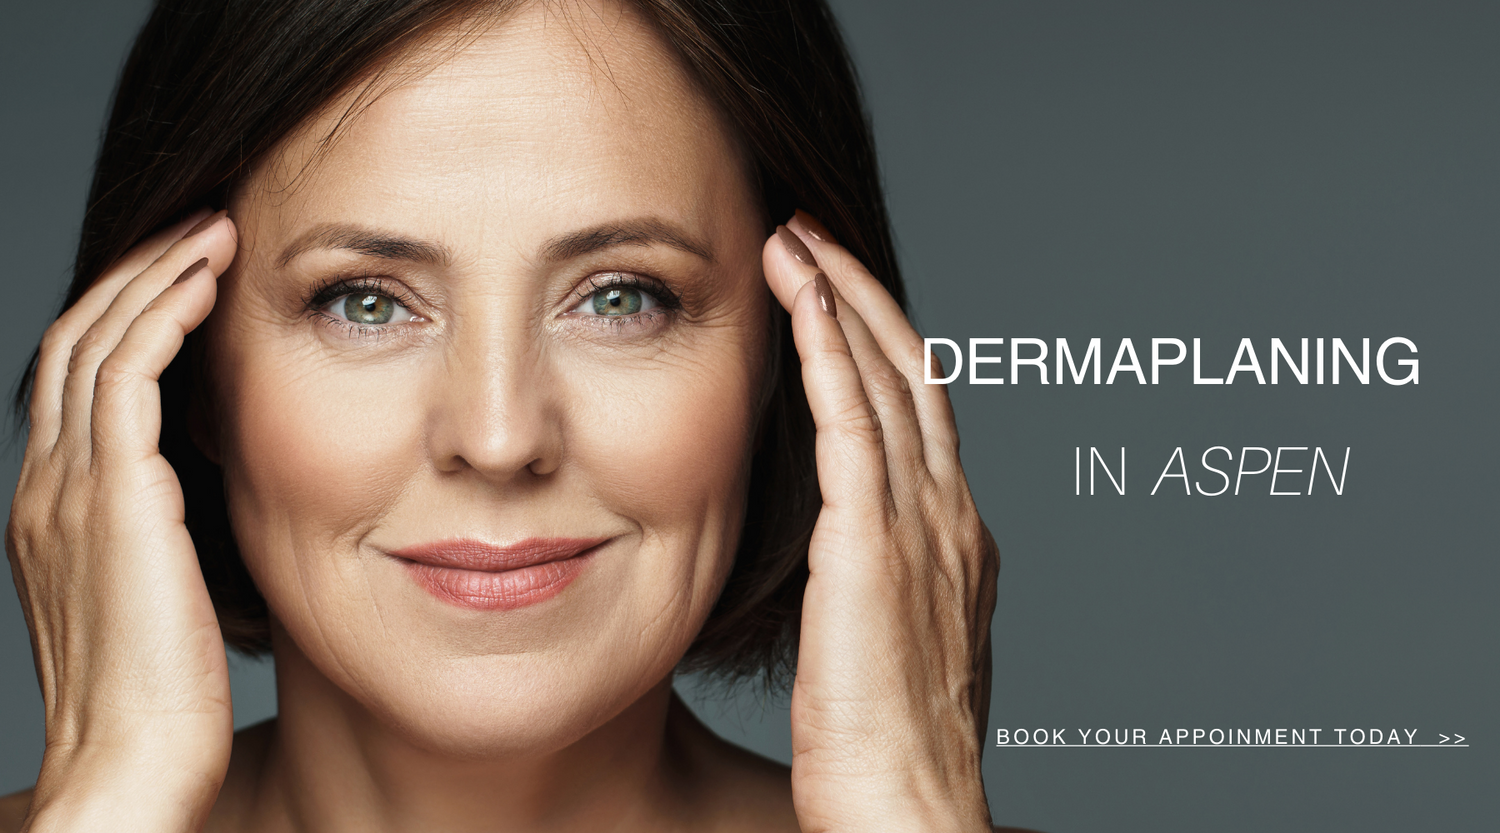 Dermaplaning in Aspen is just what you need to look your best for your summer events! 